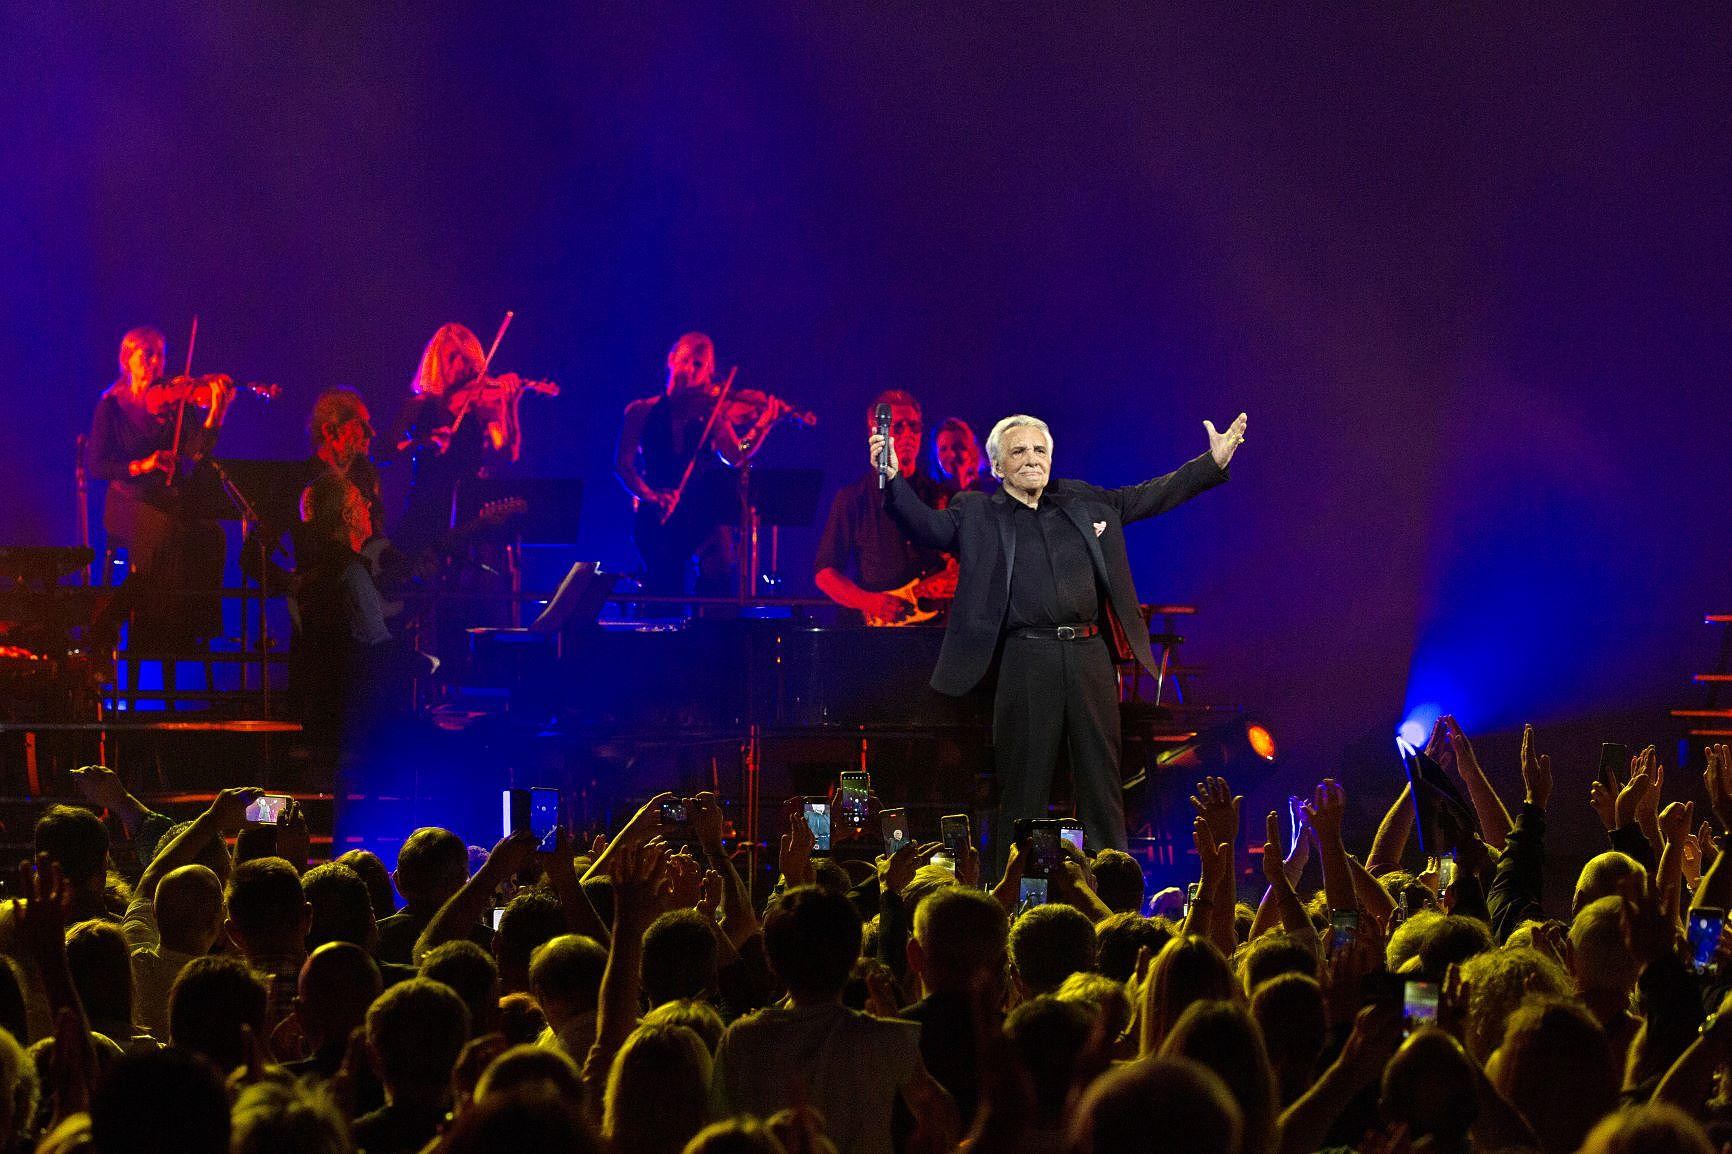 In Brest, Michel Sardou bows out with a Breton flag on his shoulders